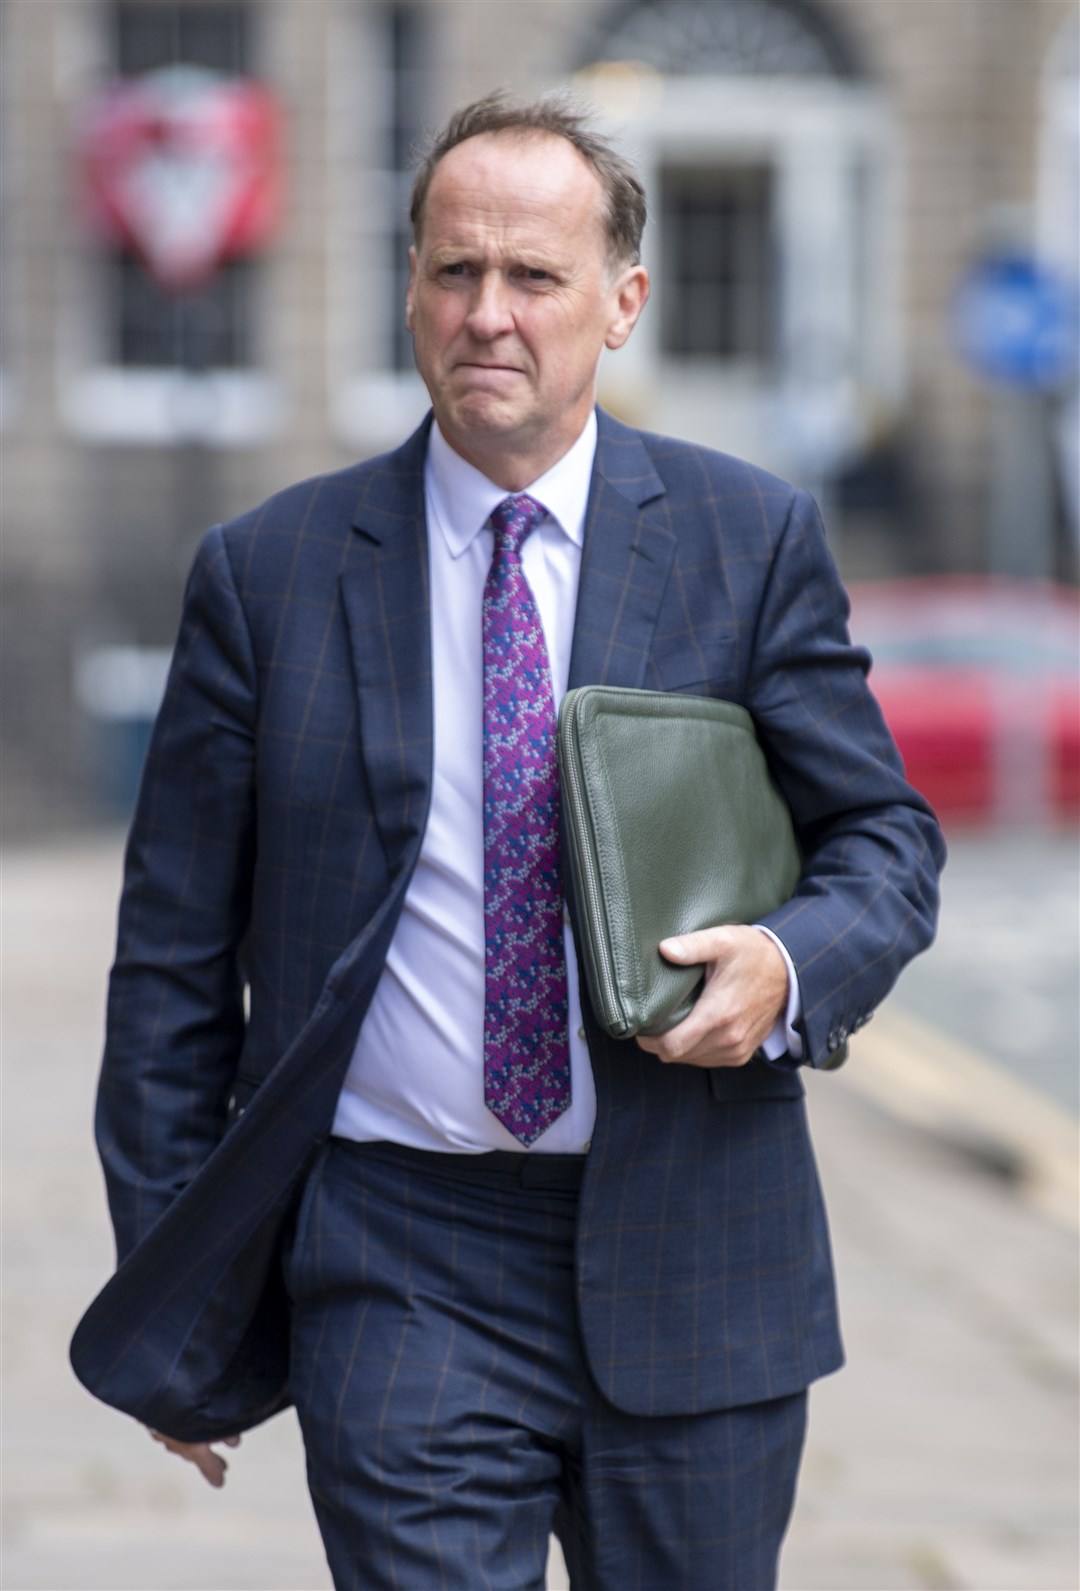 Keith Anderson, CEO of Scottish Power, was in Bute House for the talks (Lesley Martin/PA)